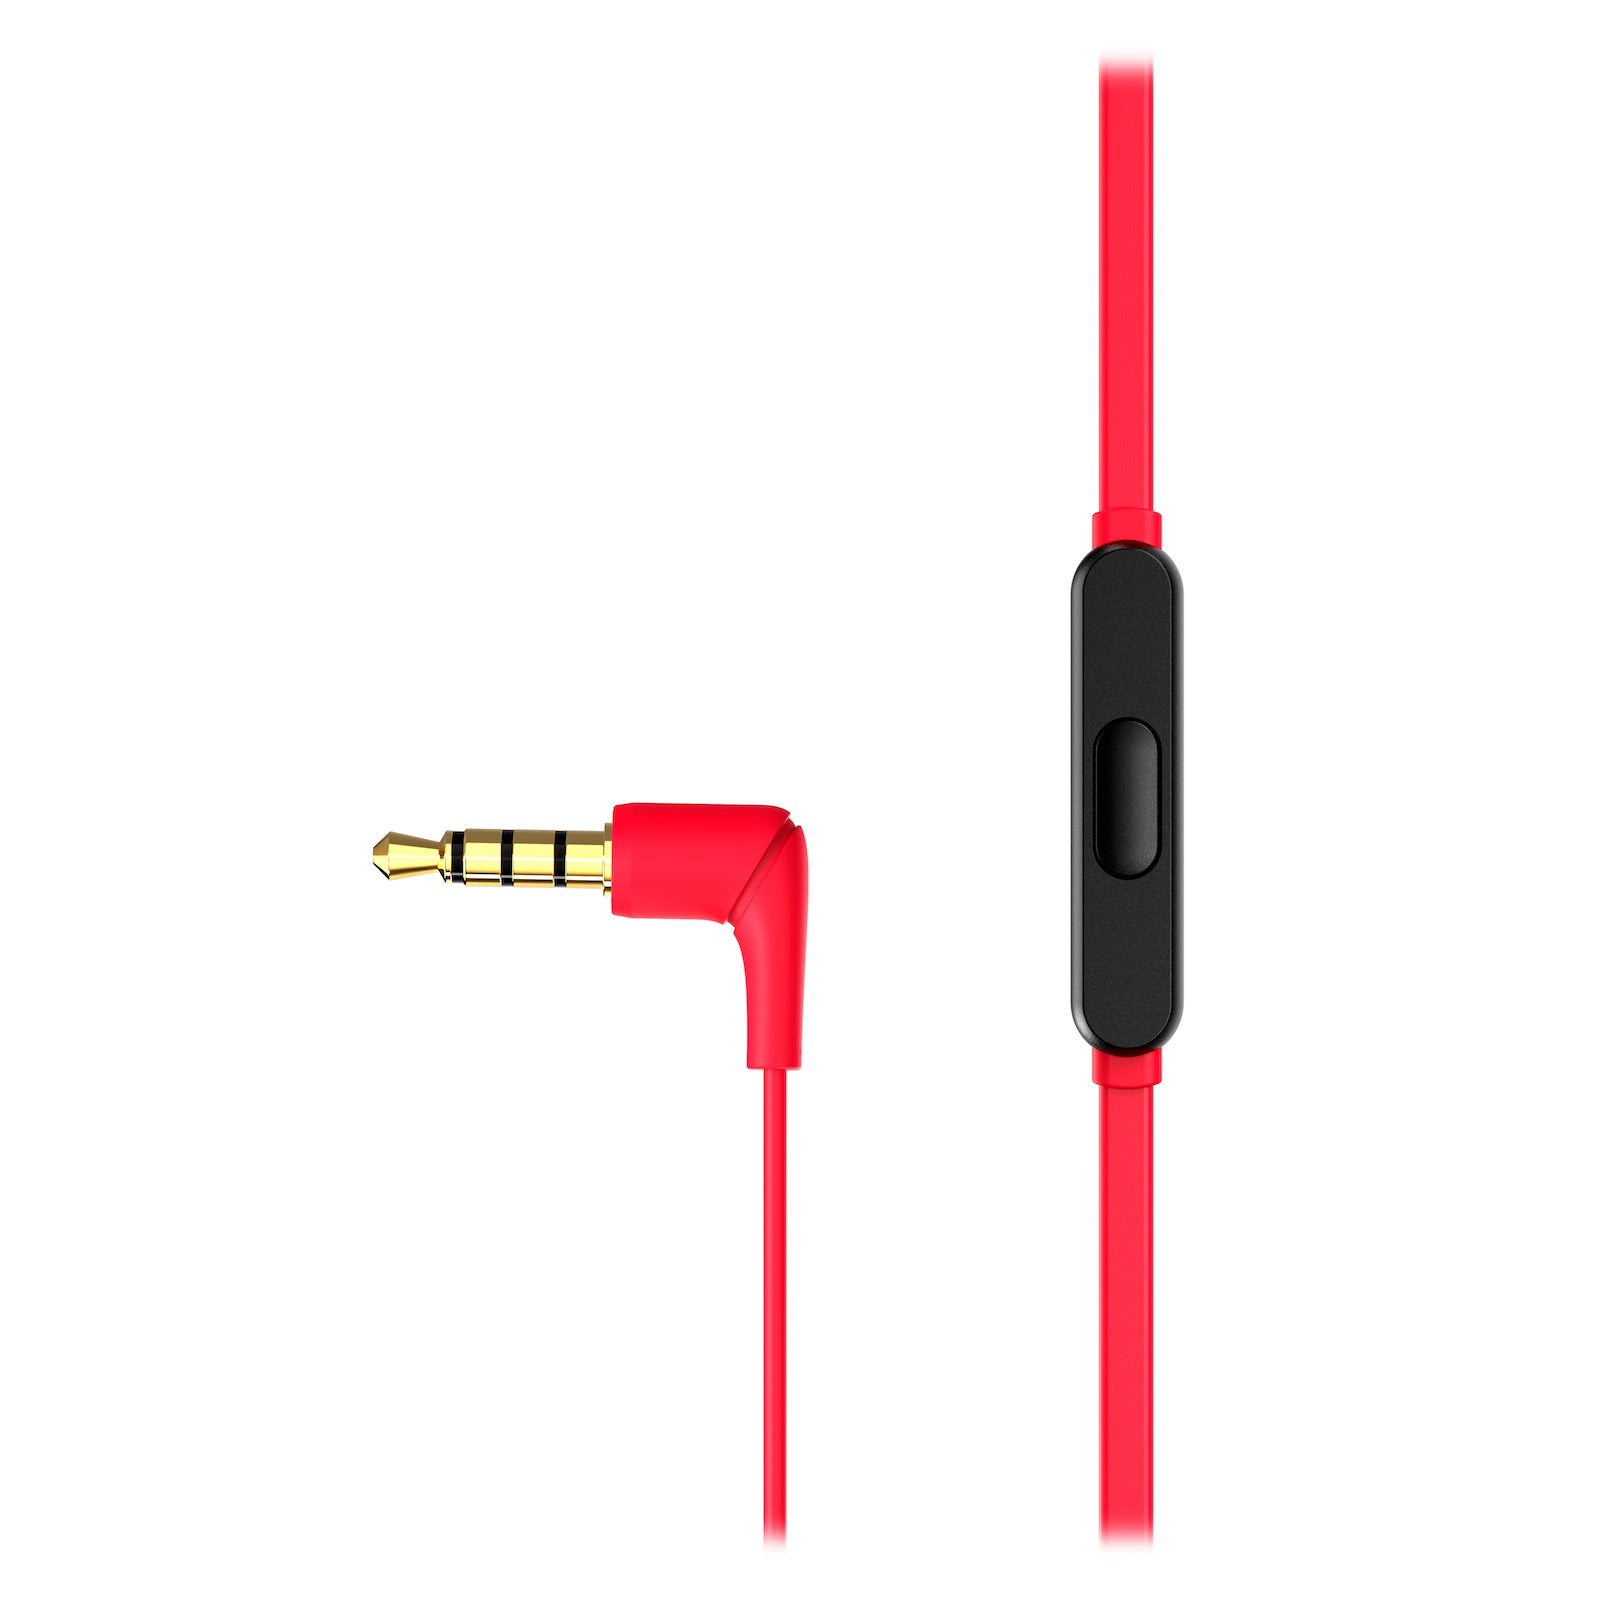 Close front view of the HyperX Earbuds II Red, featuring the microphone and the cable